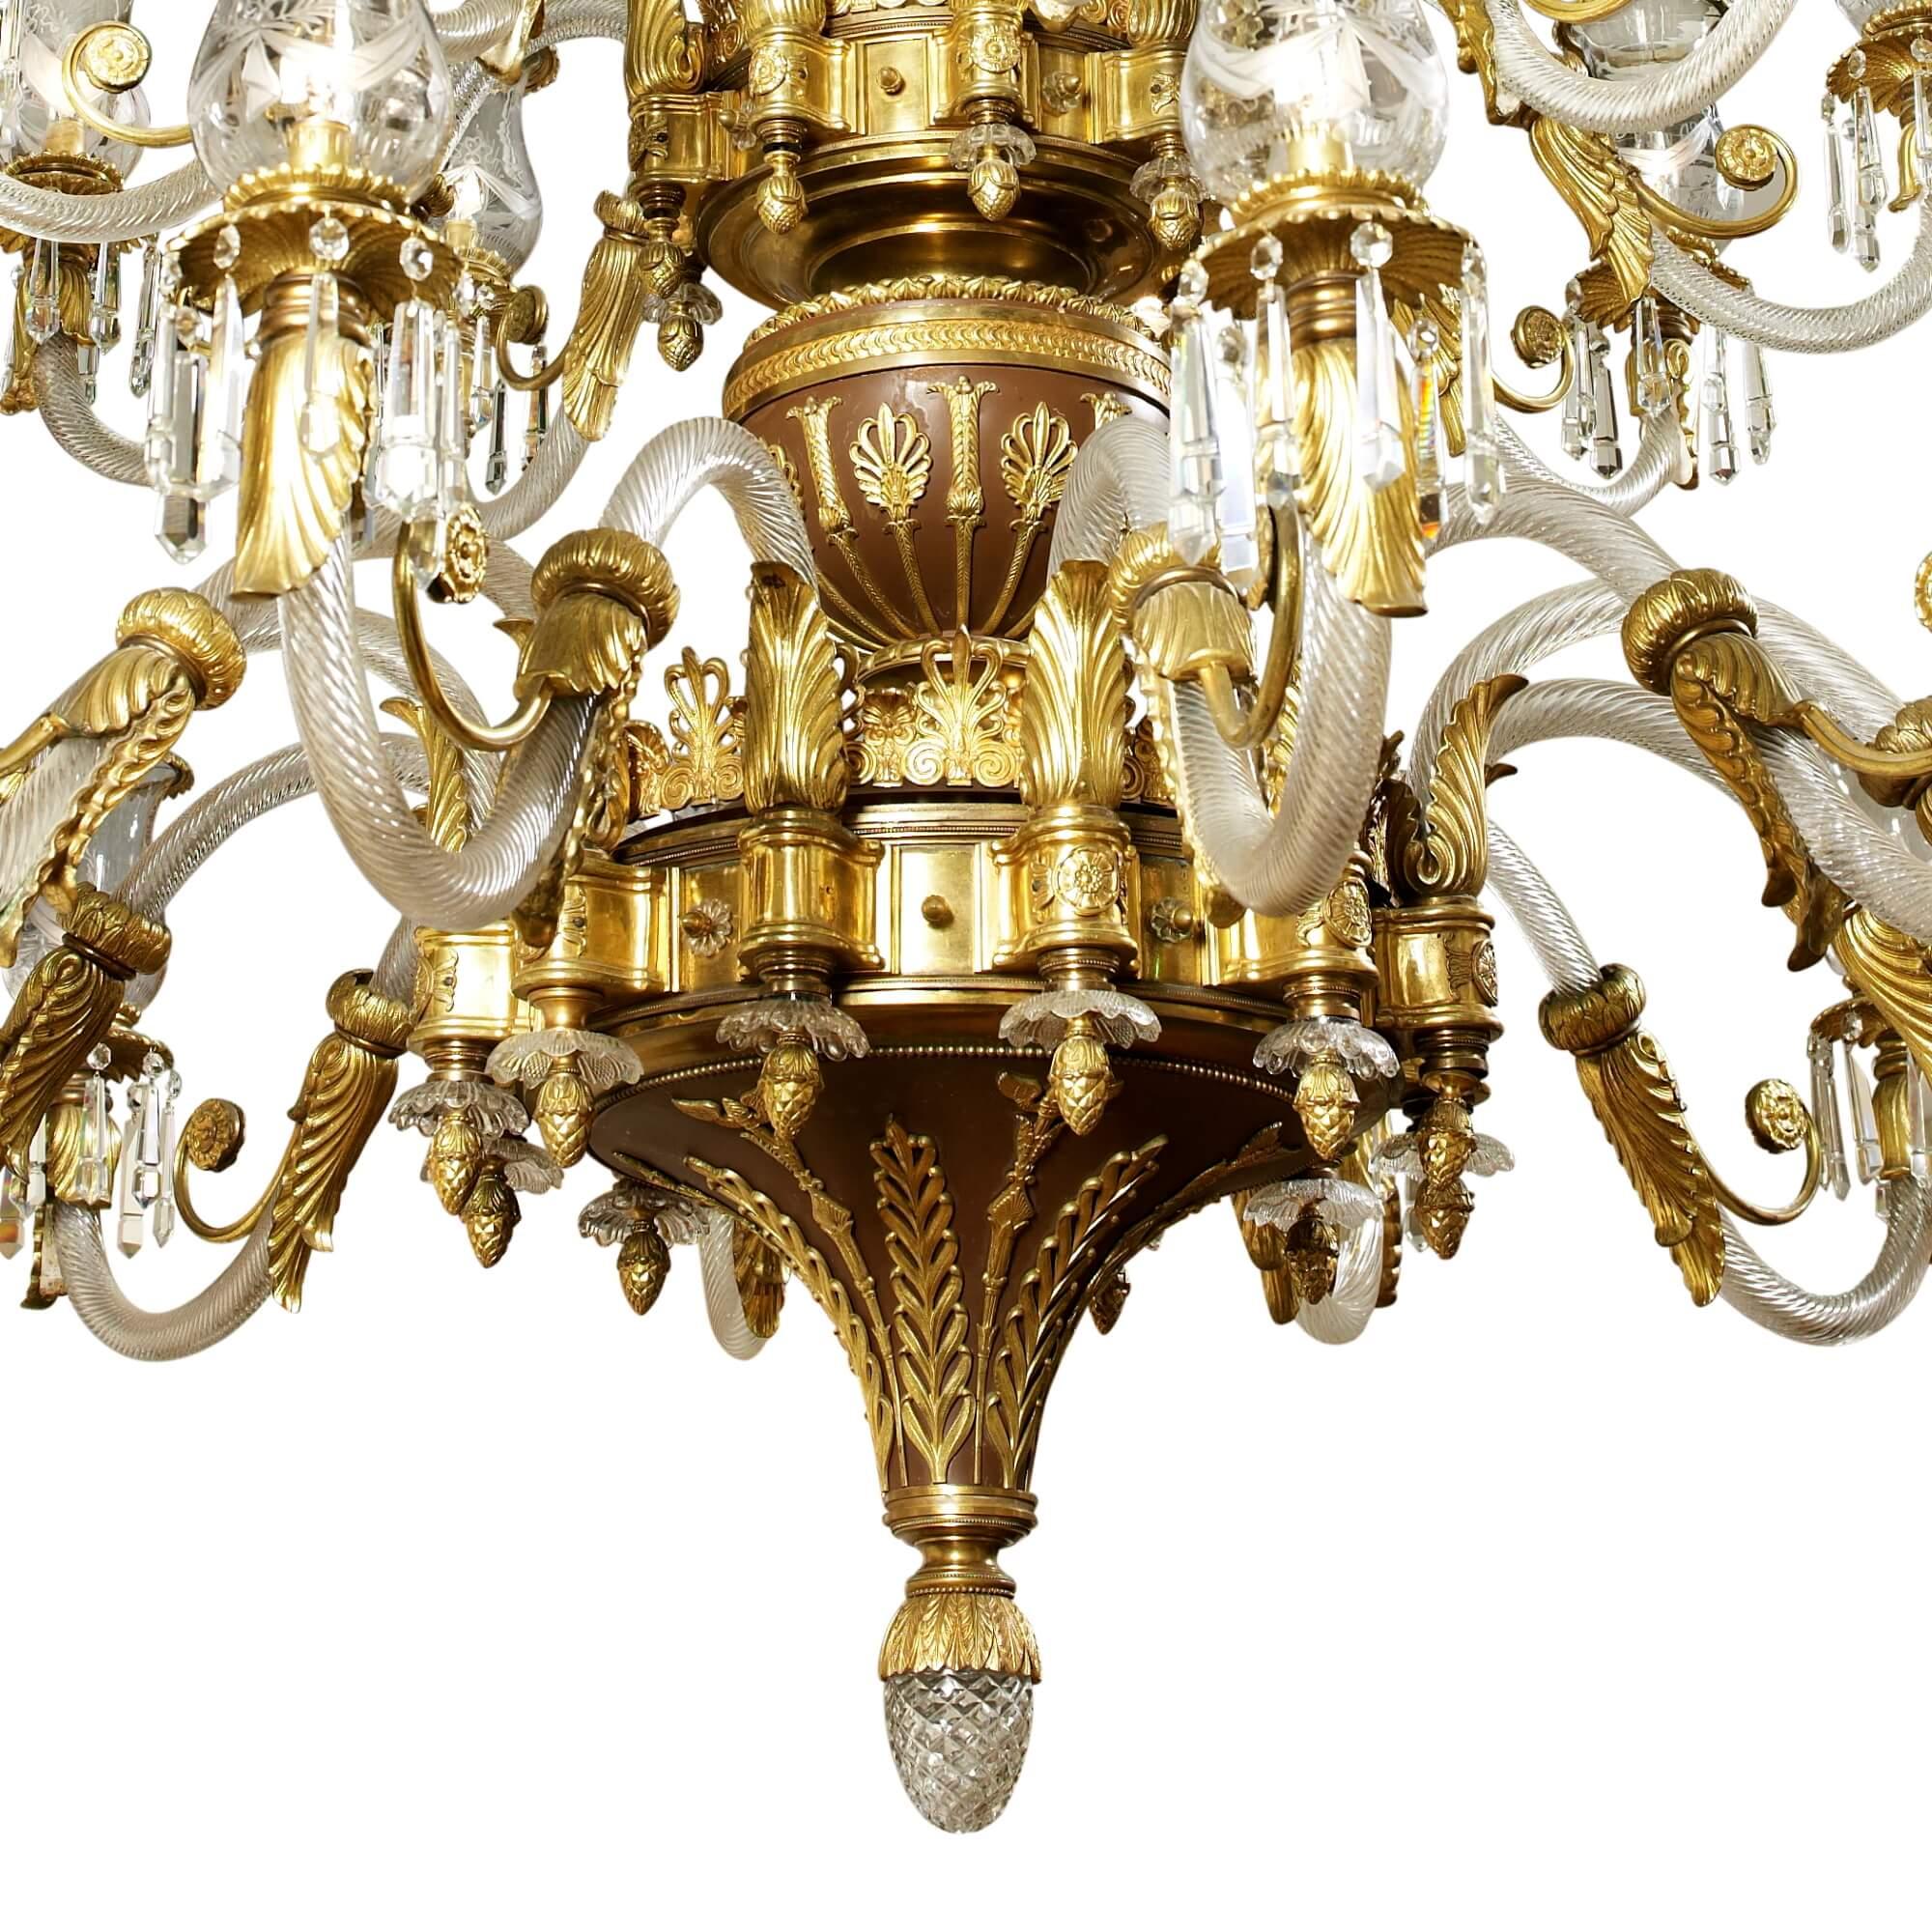 Large antique late 19th century French cut glass and bronze chandelier
French, c. 1880
Dimensions: Height 250cm, diameter 200cm

Consisting of 27 lights, this splendid chandelier is crafted from cut glass, ormolu and patinated bronze, designed